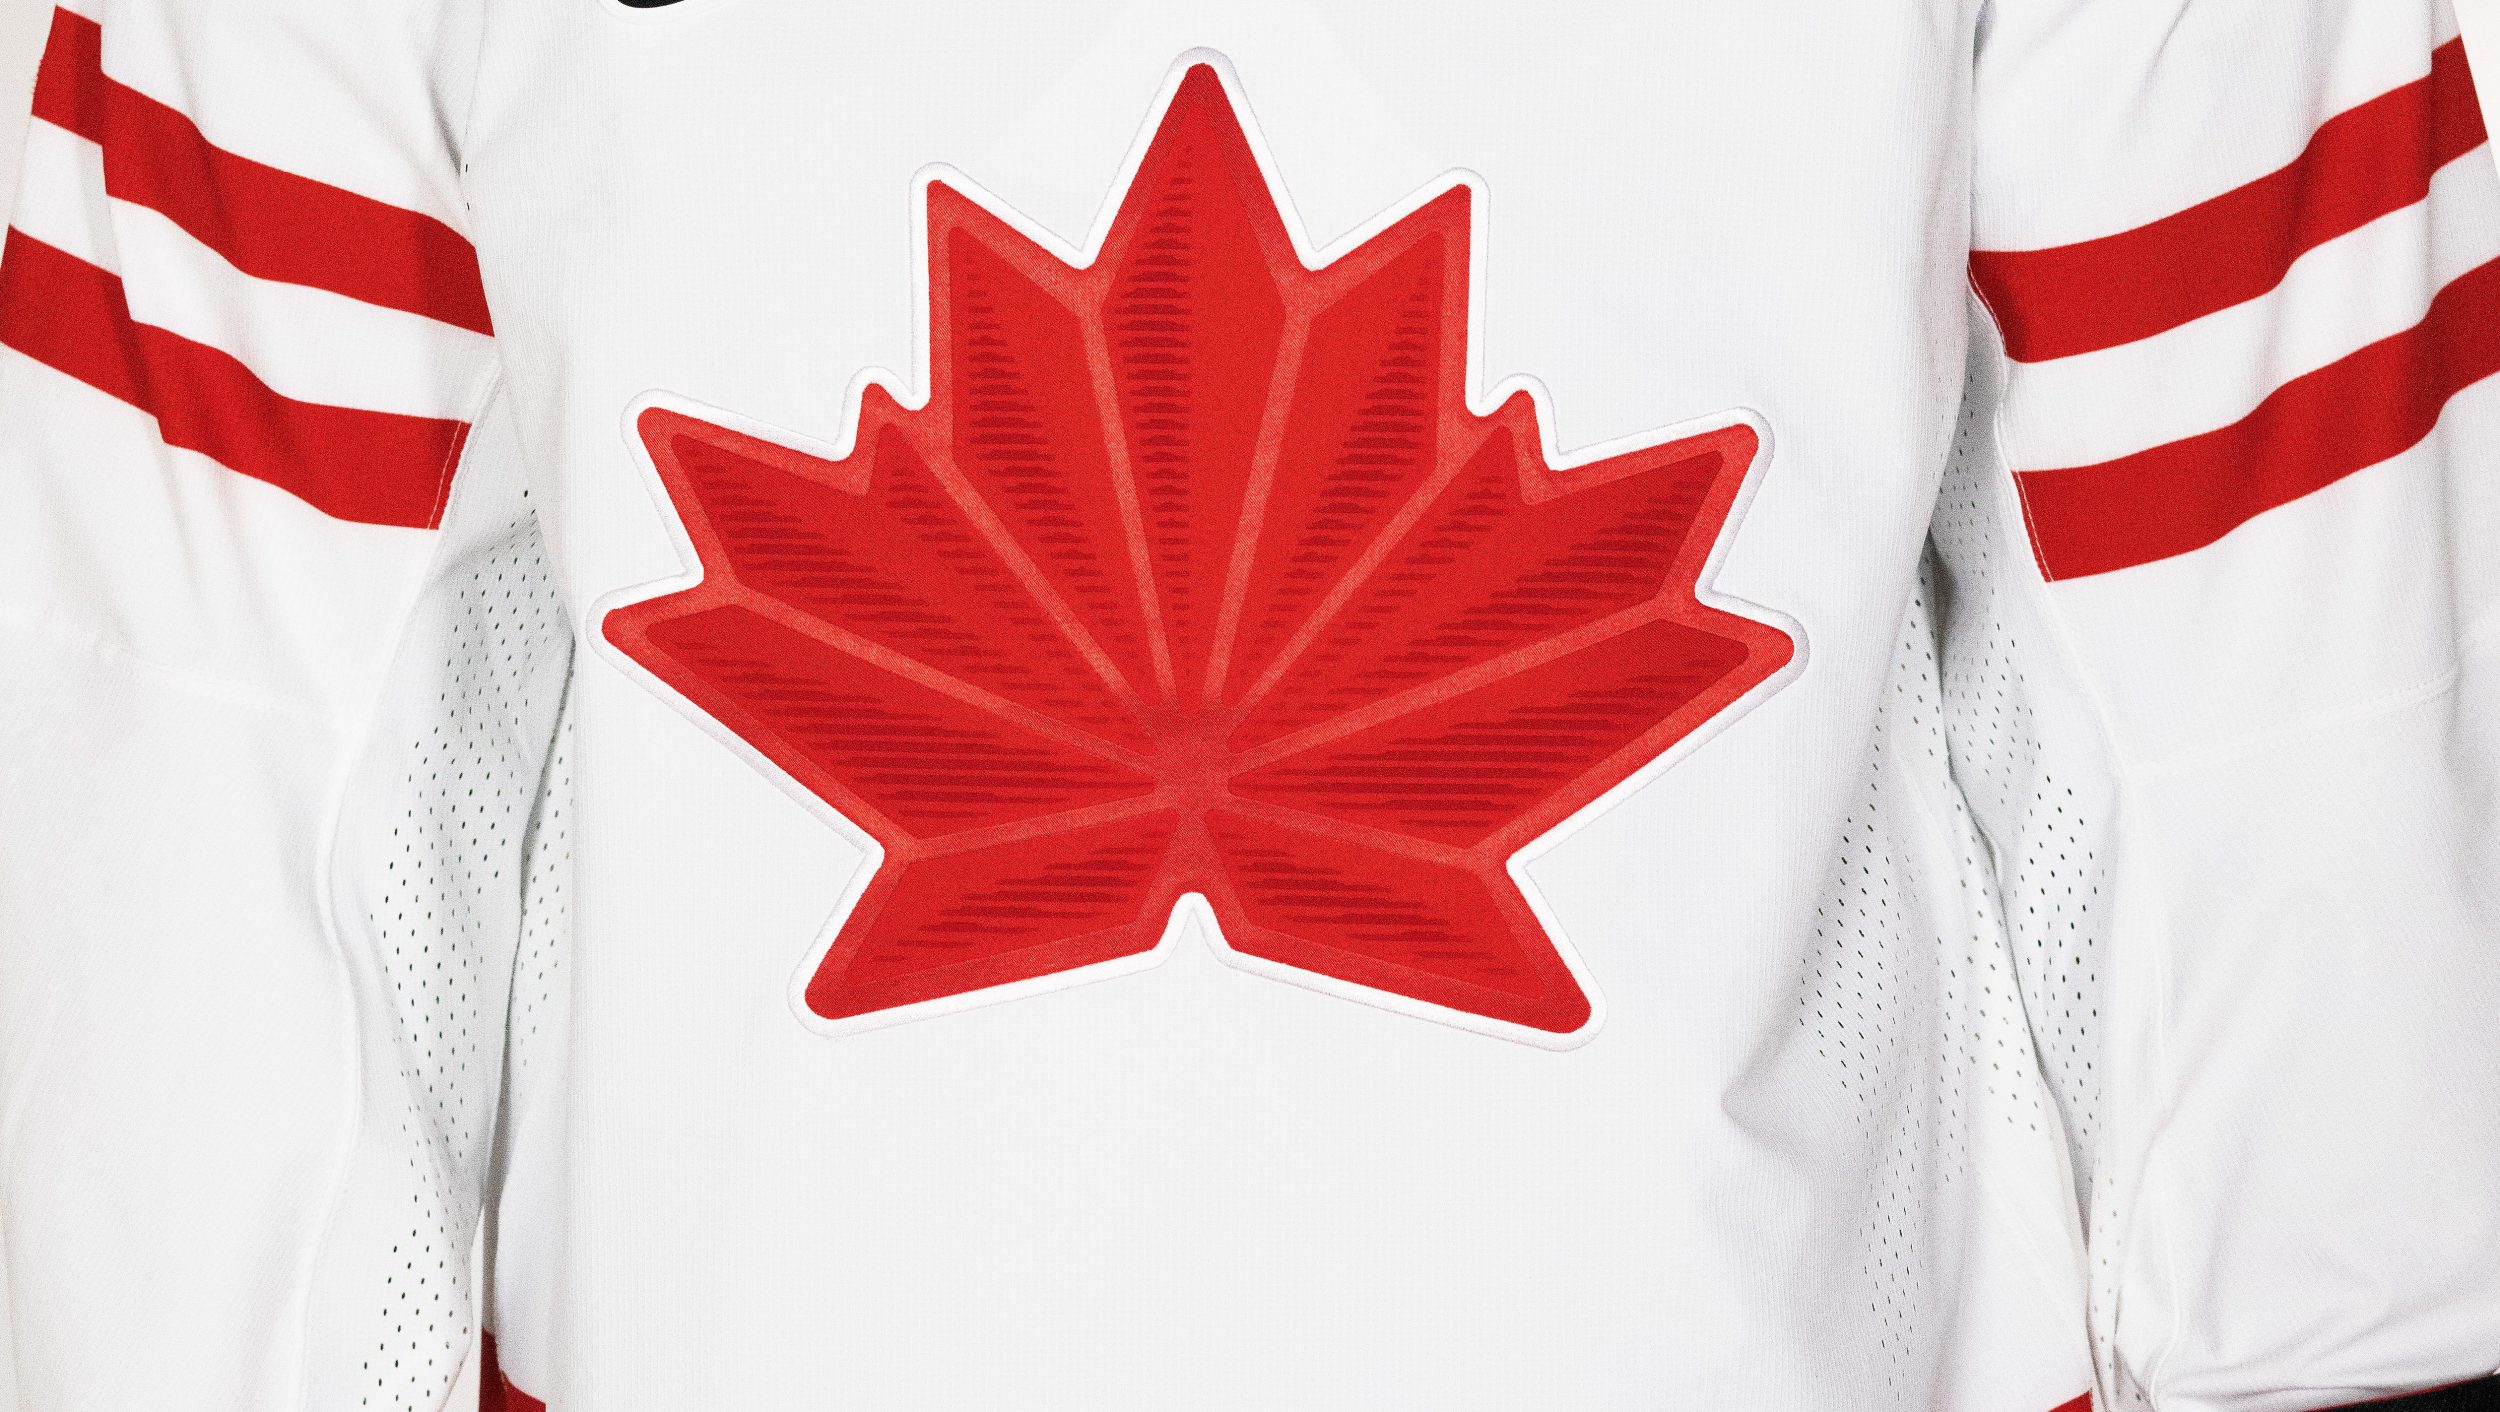 Team Canada Olympic Jerseys Revealed for 2022! 